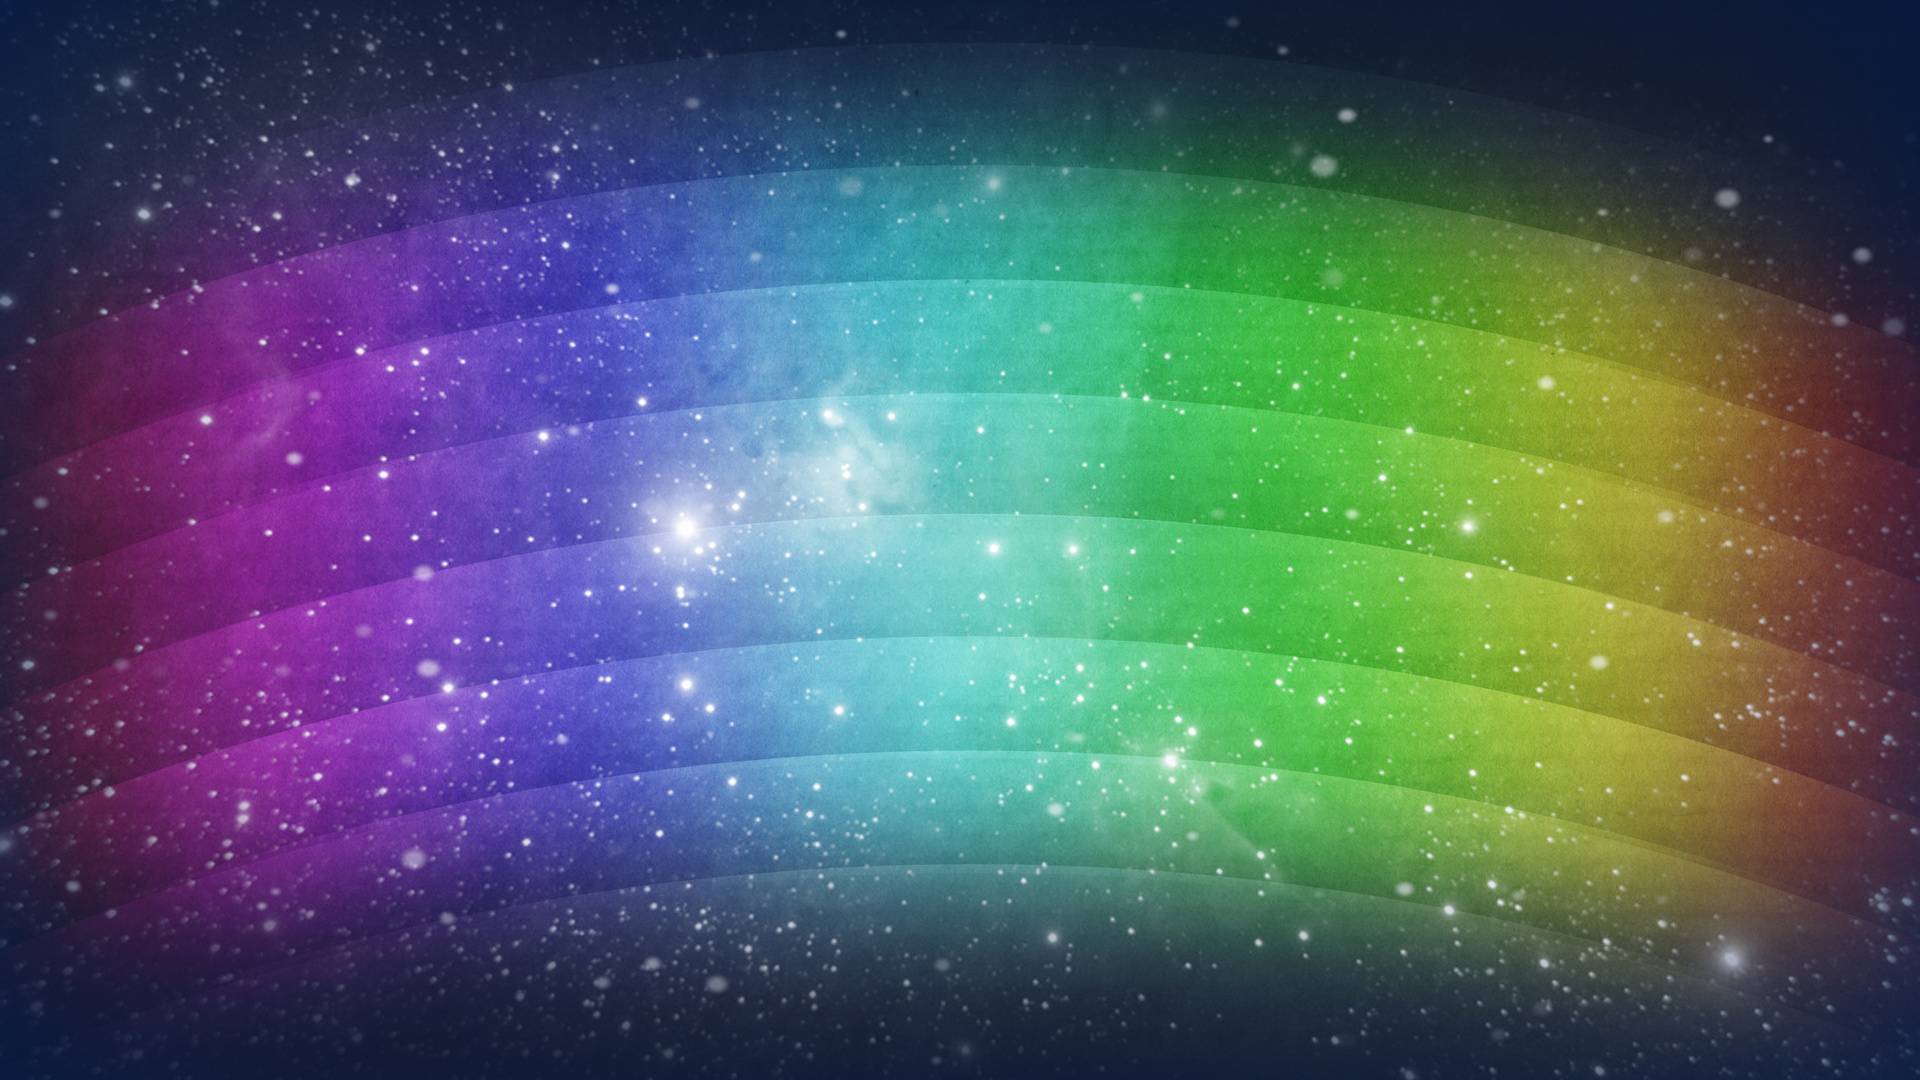 Live HD Rainbow Wallpaper, Photo for PC & Mac, Laptop, Tablet